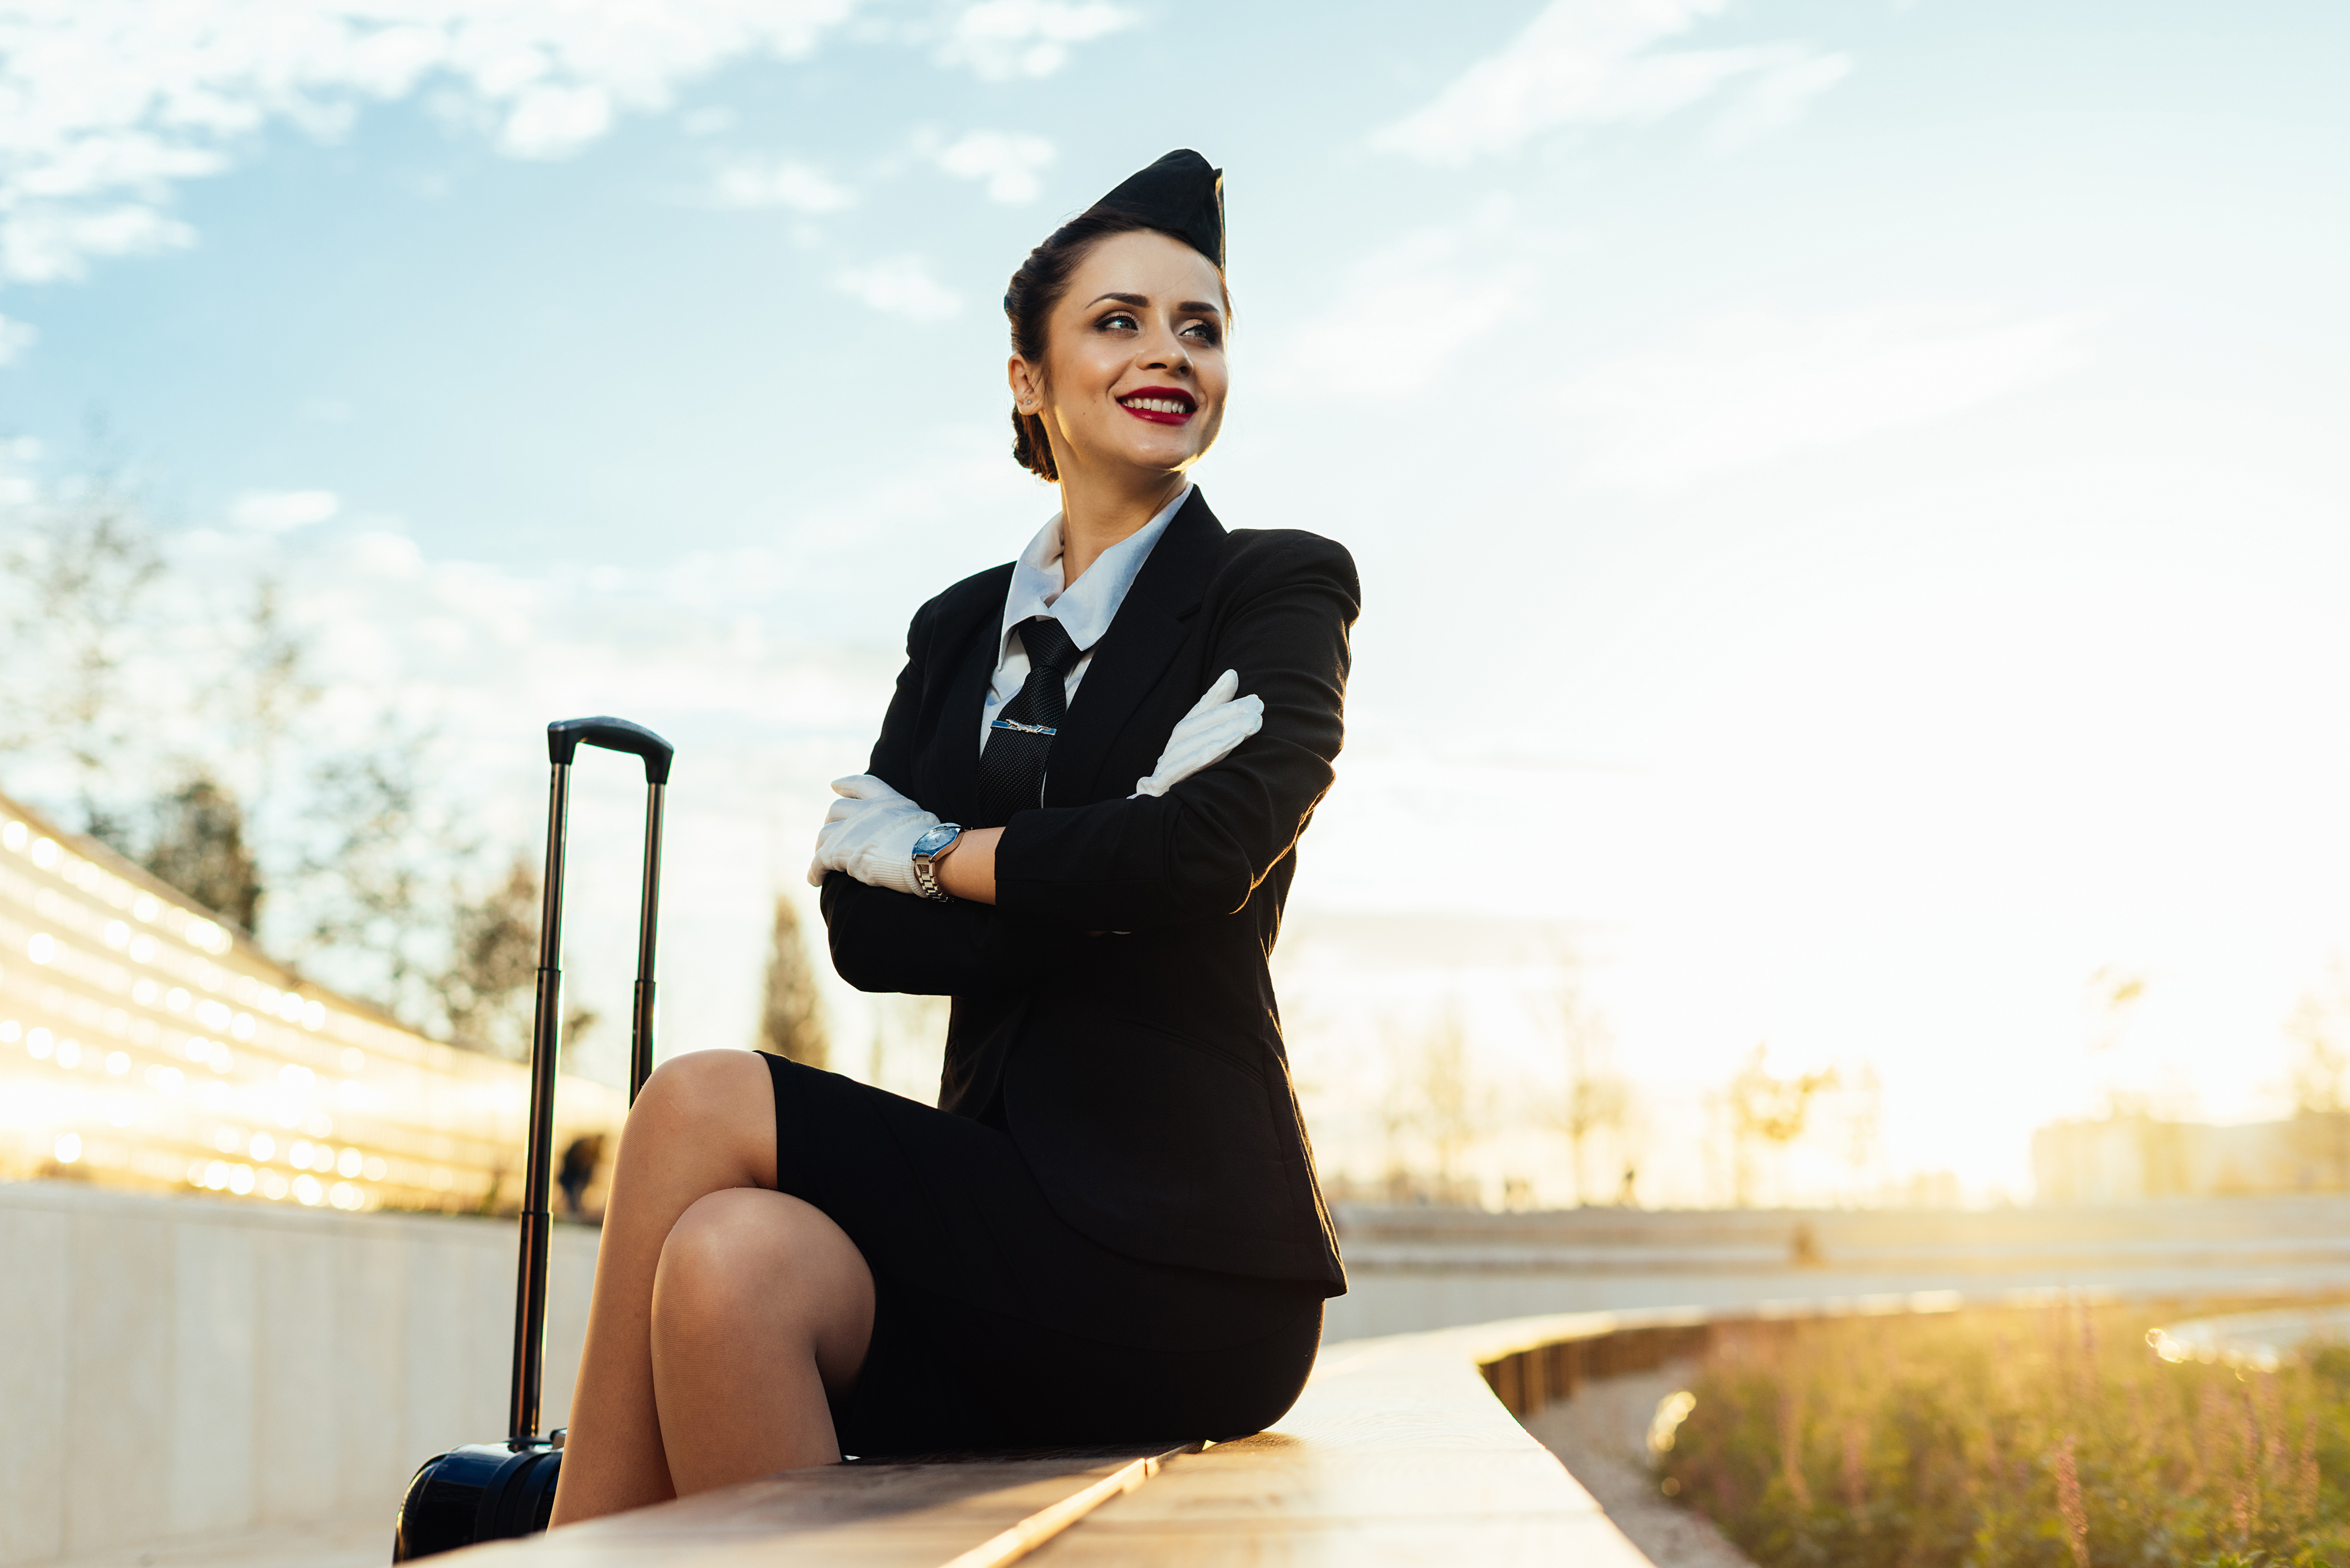 Items Flight Attendants Recommend Bringing On The Plane